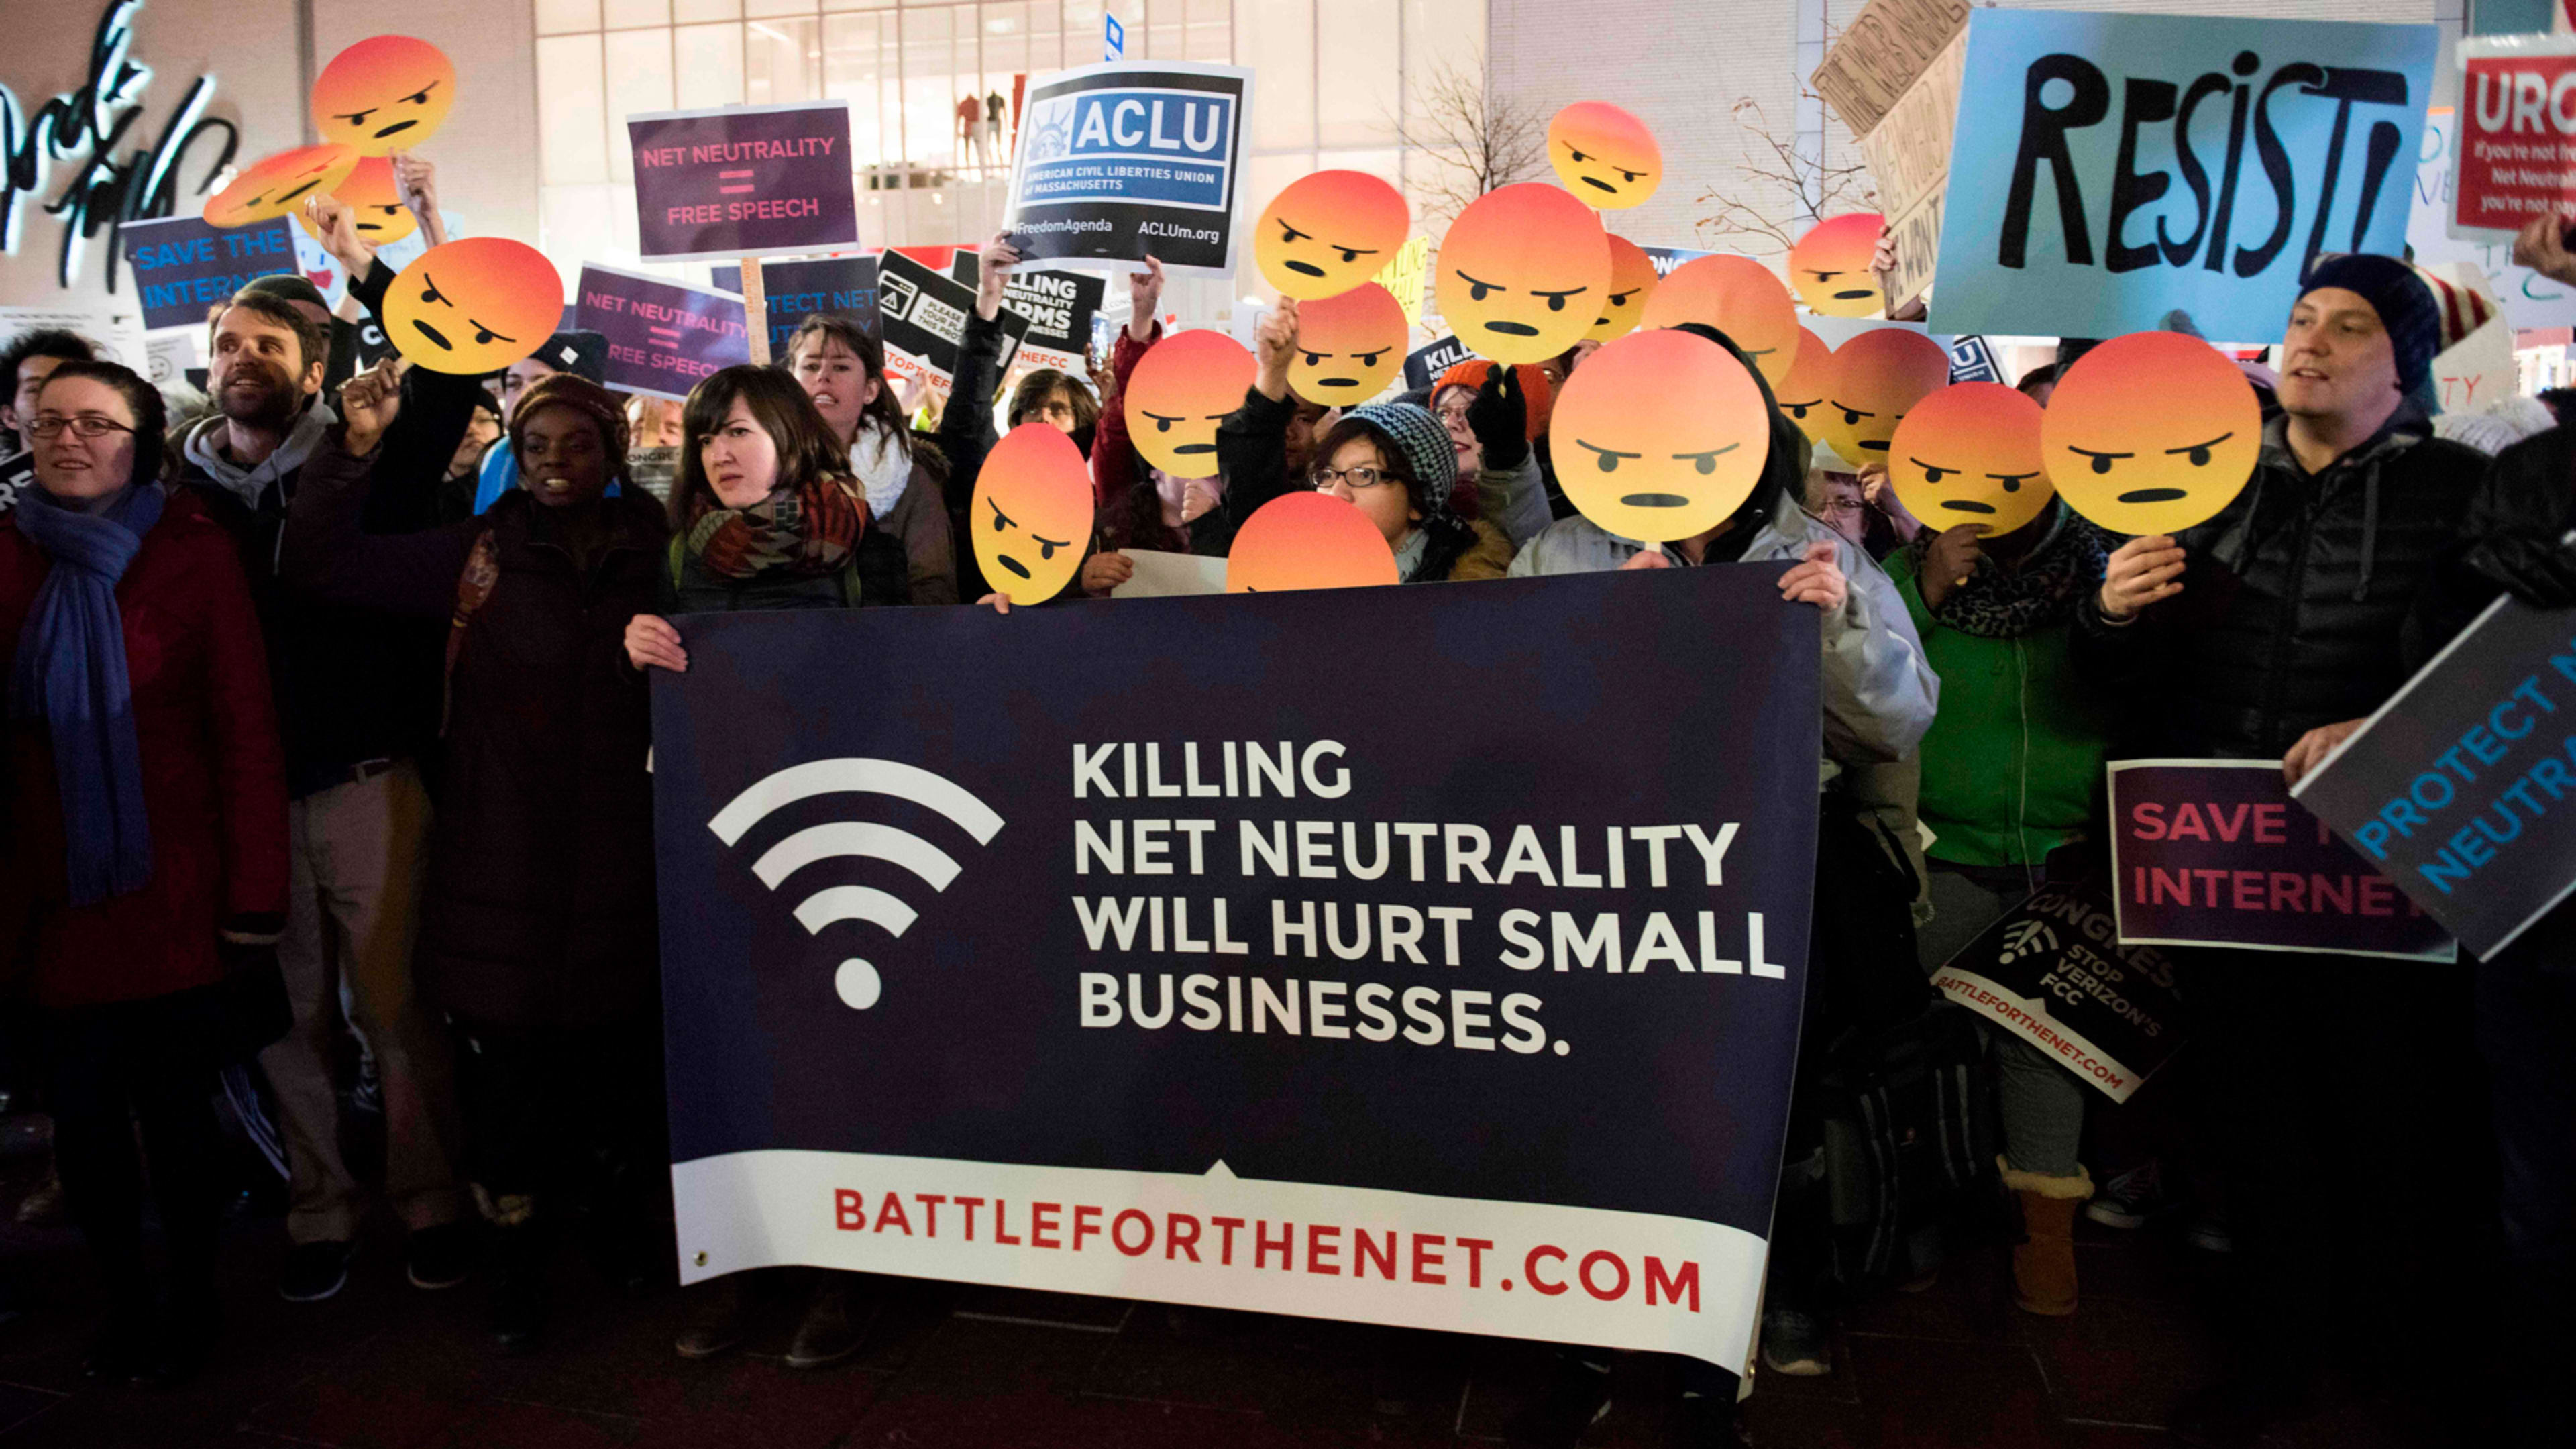 Today’s net neutrality Senate victory was symbolic. Maybe now the real fight can resume